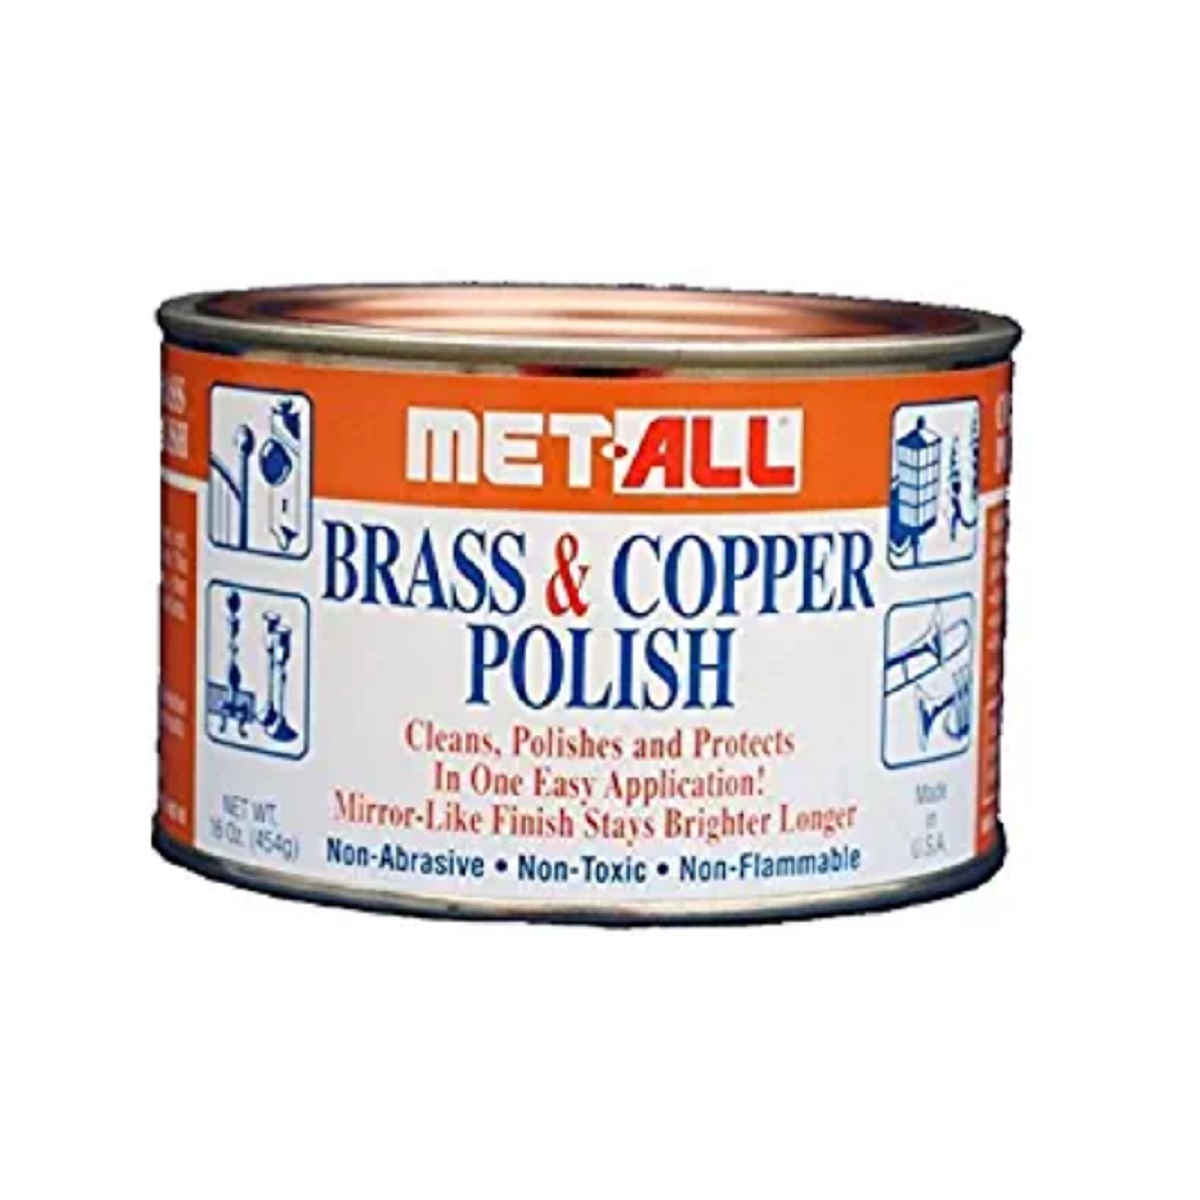 Met-All BC-10 Brass & Copper Polish 16 oz. Can